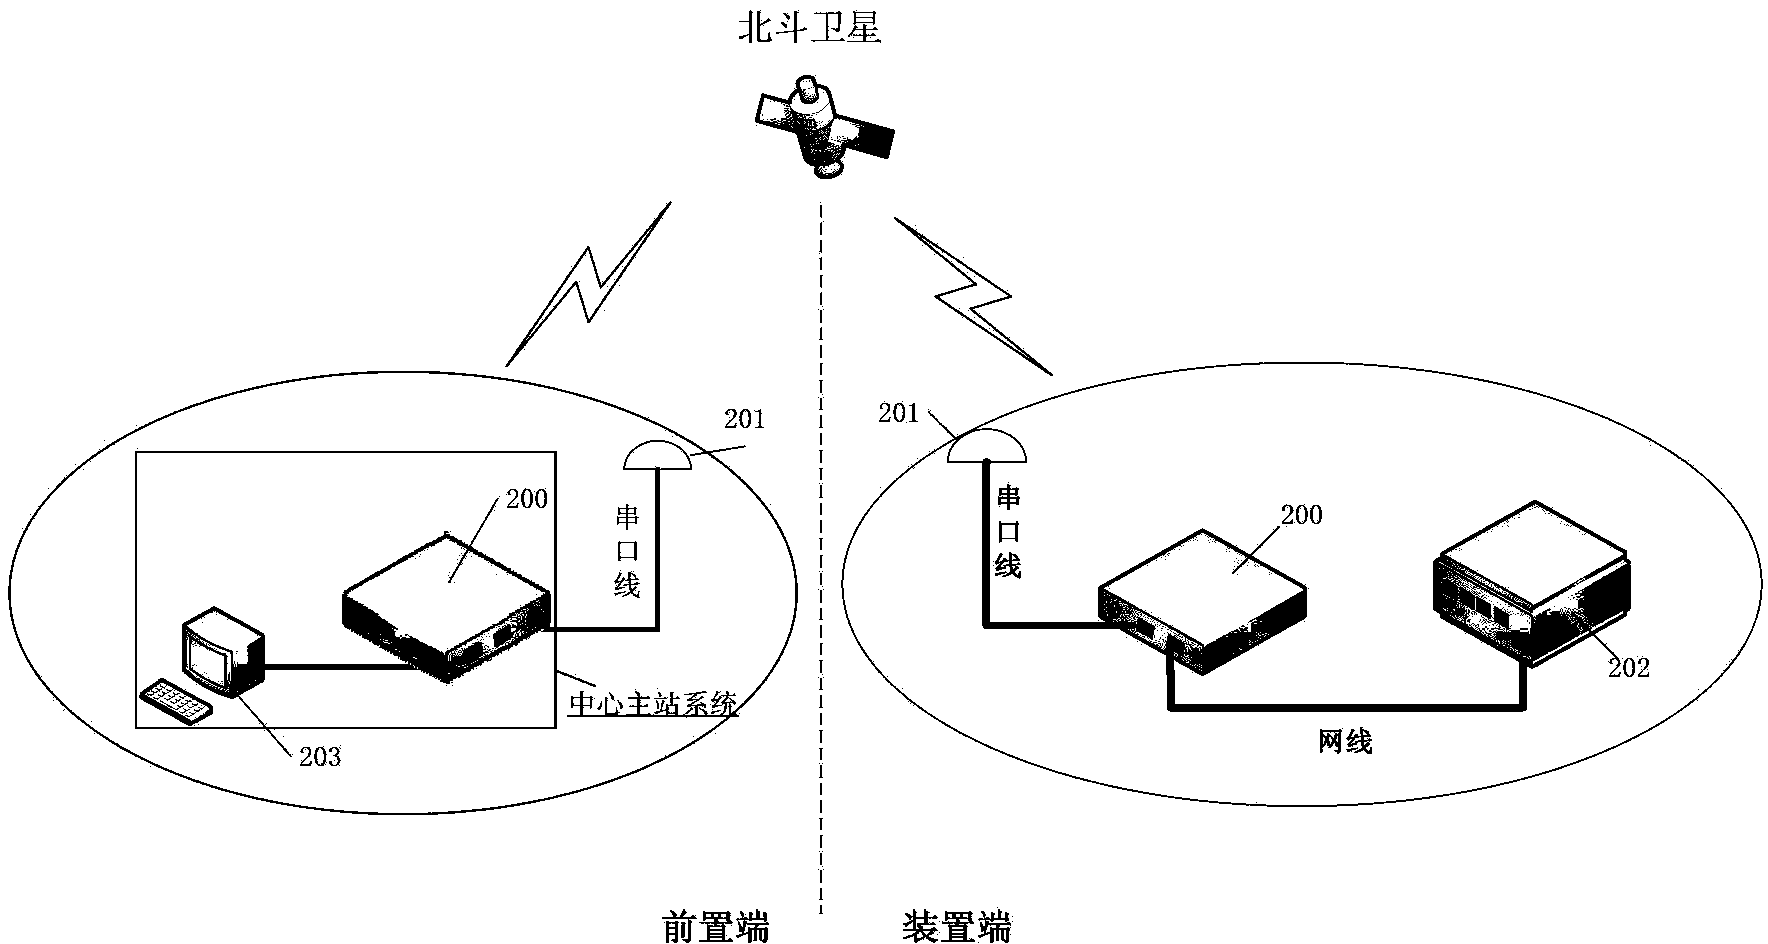 Power utilization information collection method and system based on technology of Beidou satellite navigation system